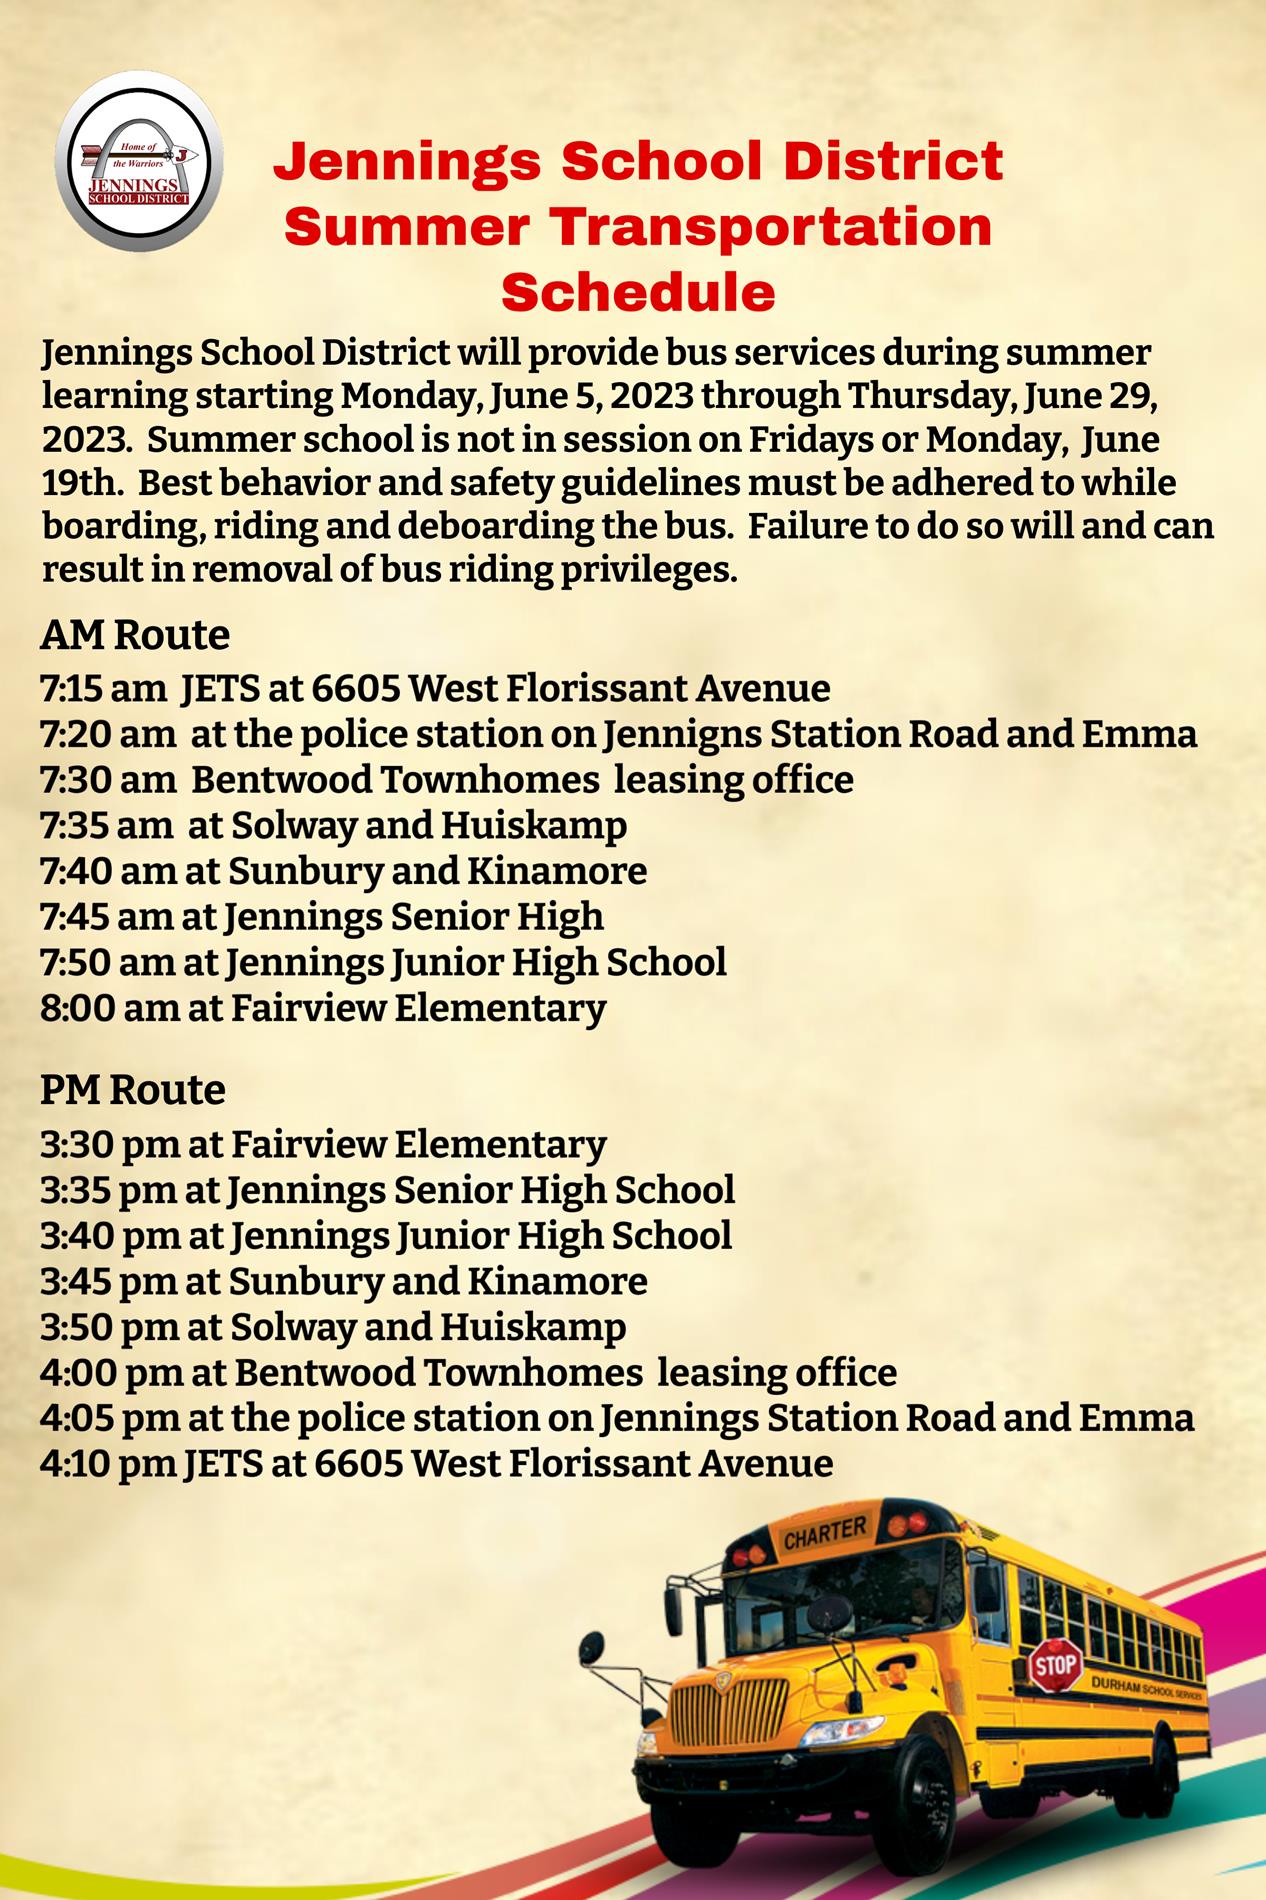 Jennings School District will provide bus services during summer learning starting Monday, June 5th, 2023 through Thursday, June 29, 2023. Summer school is not in session on Fridays or Monday, June 19th. Best behavior and safety guidelines must be adhered to while boarding, riding and deboarding the bus. Failure to do so will and can result in removal of bus riding privileges. 